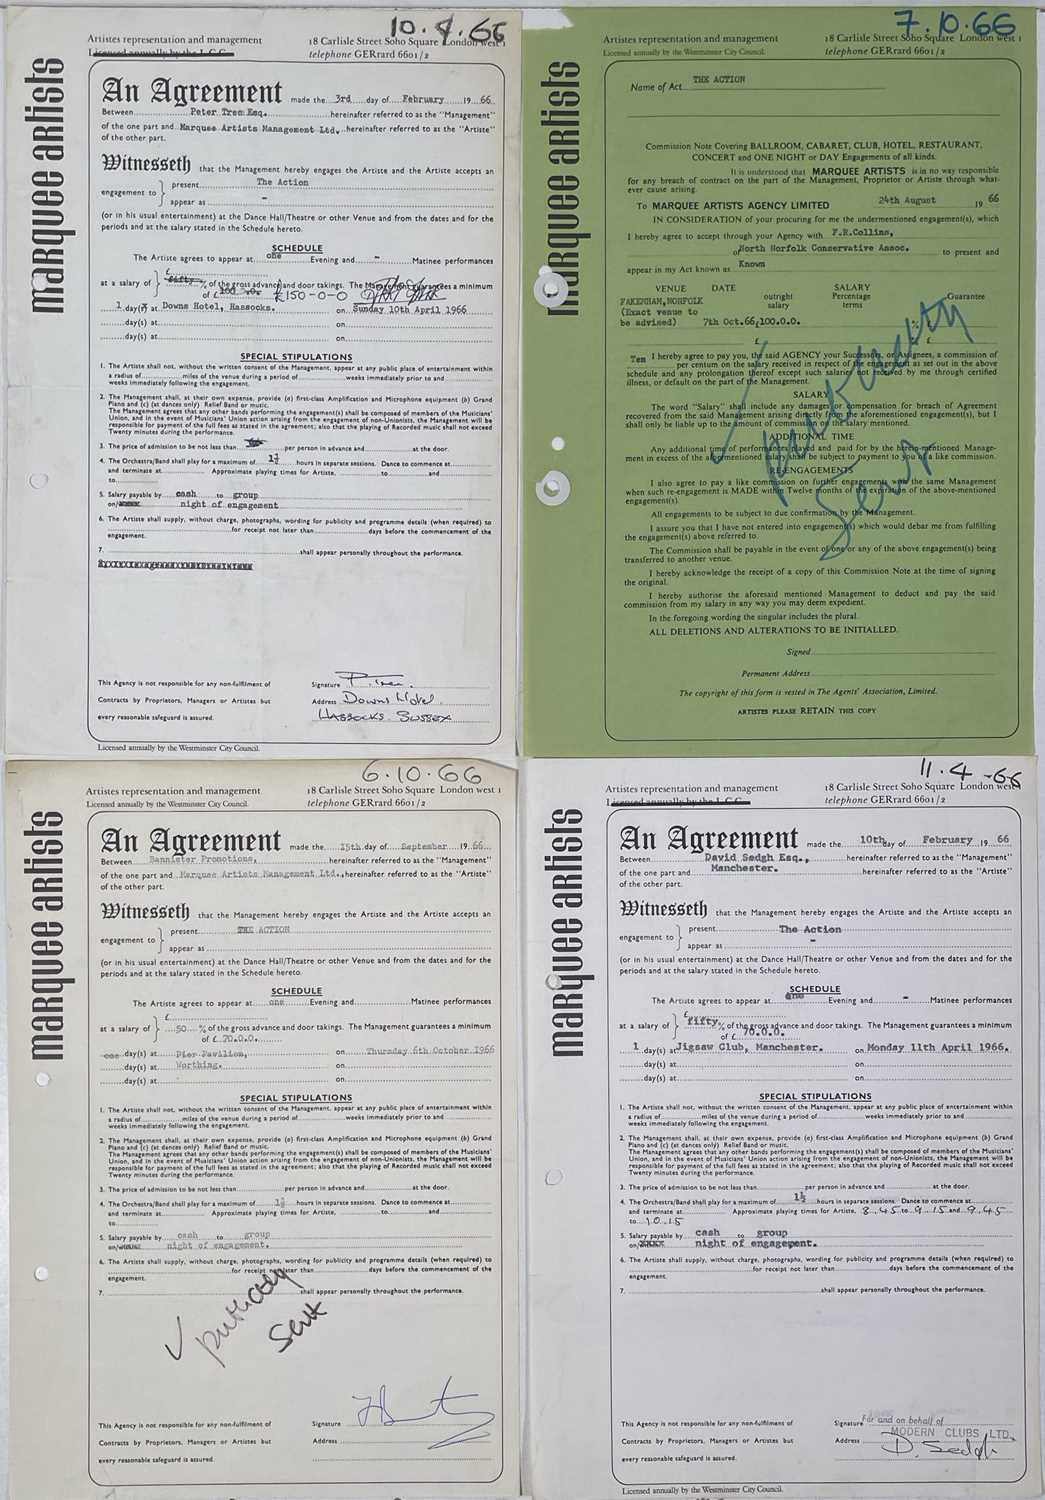 THE ACTION - 1966 GIG CONTRACTS.